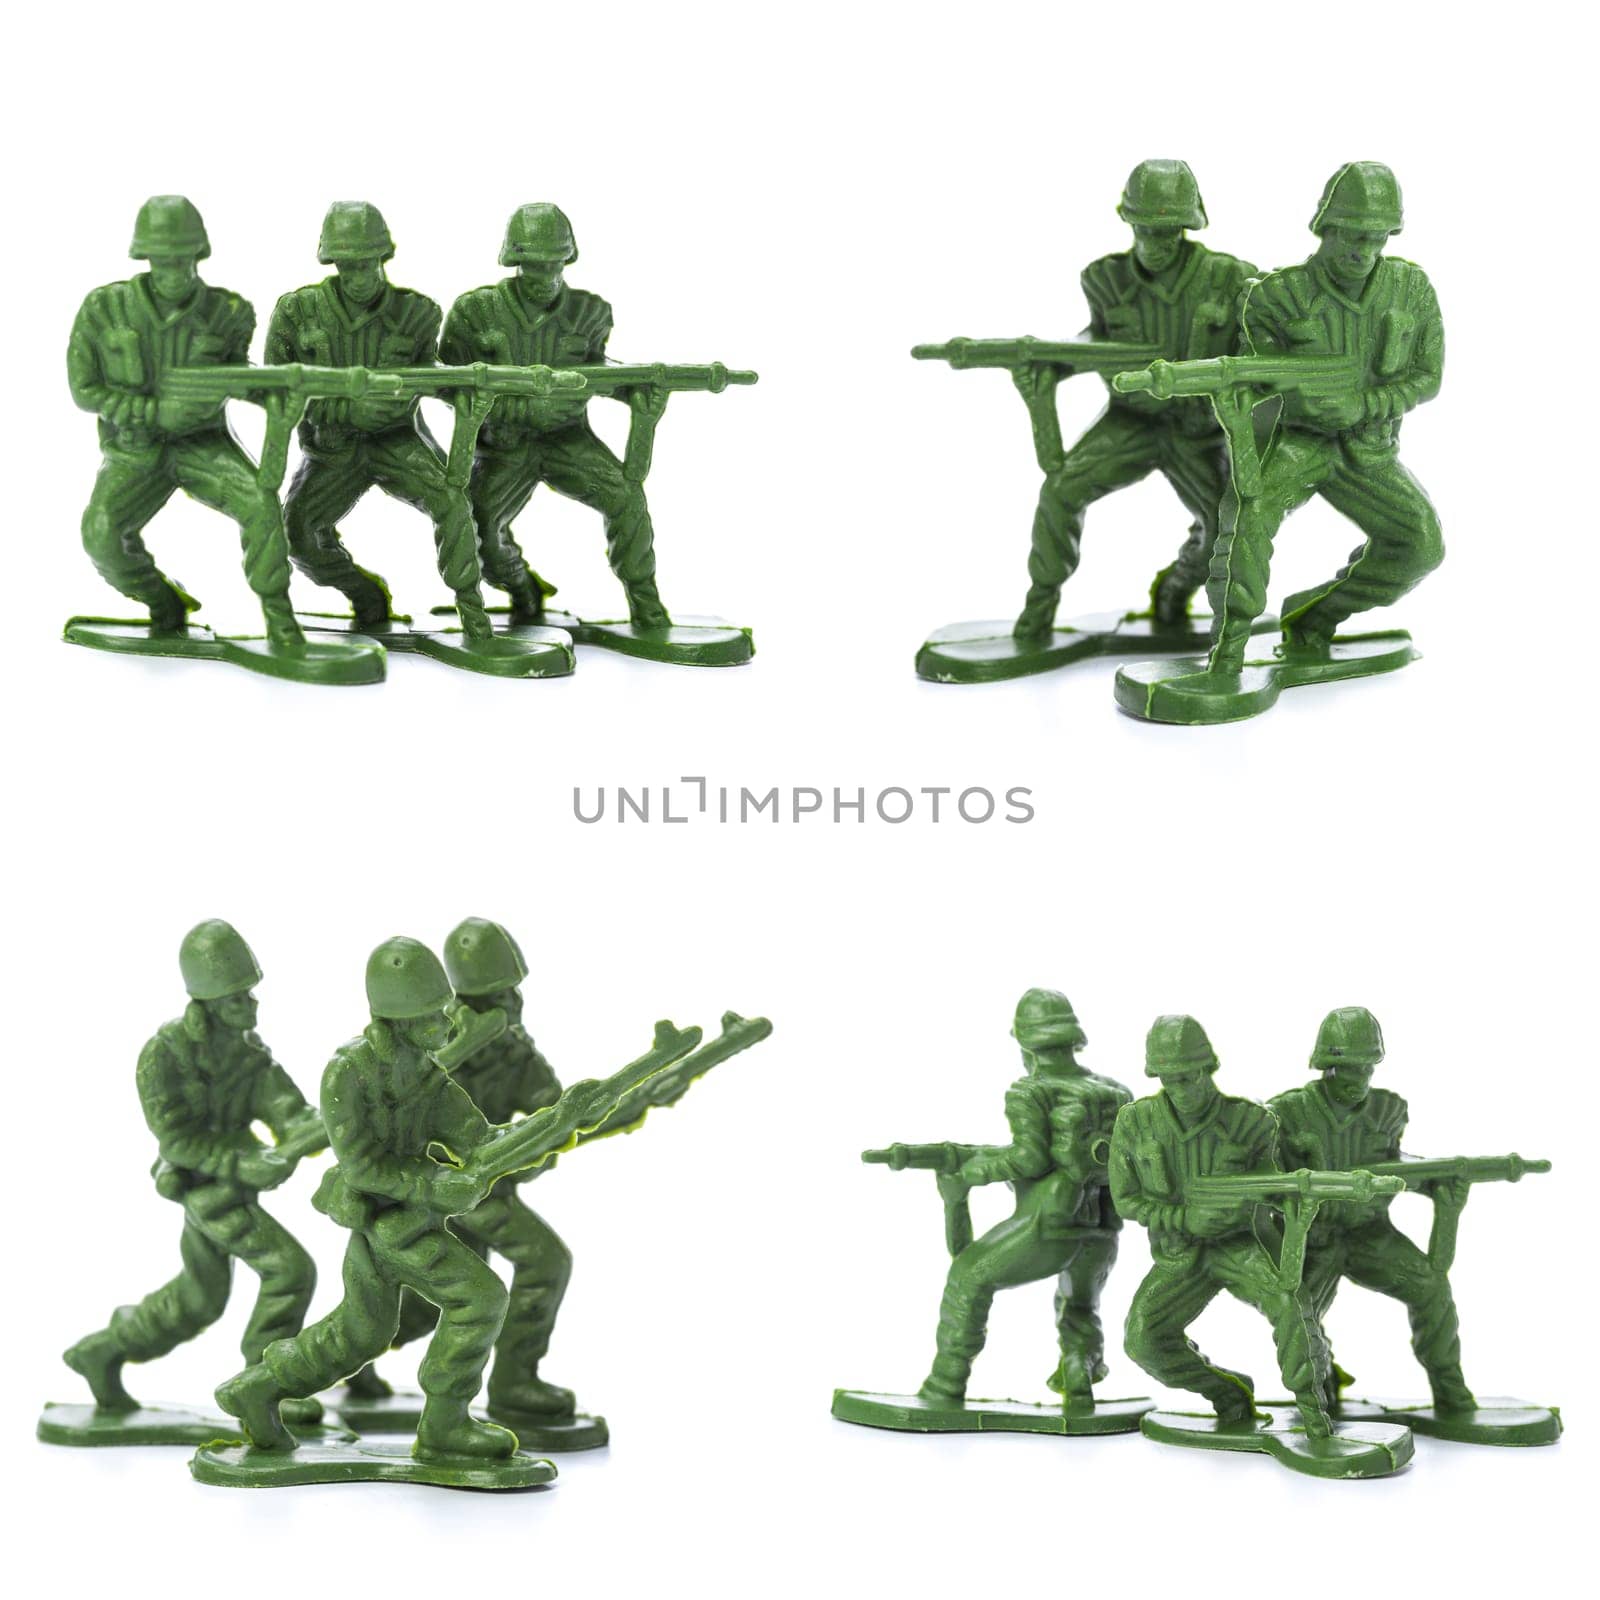 Collection of traditional toy soldiers by Fabrikasimf